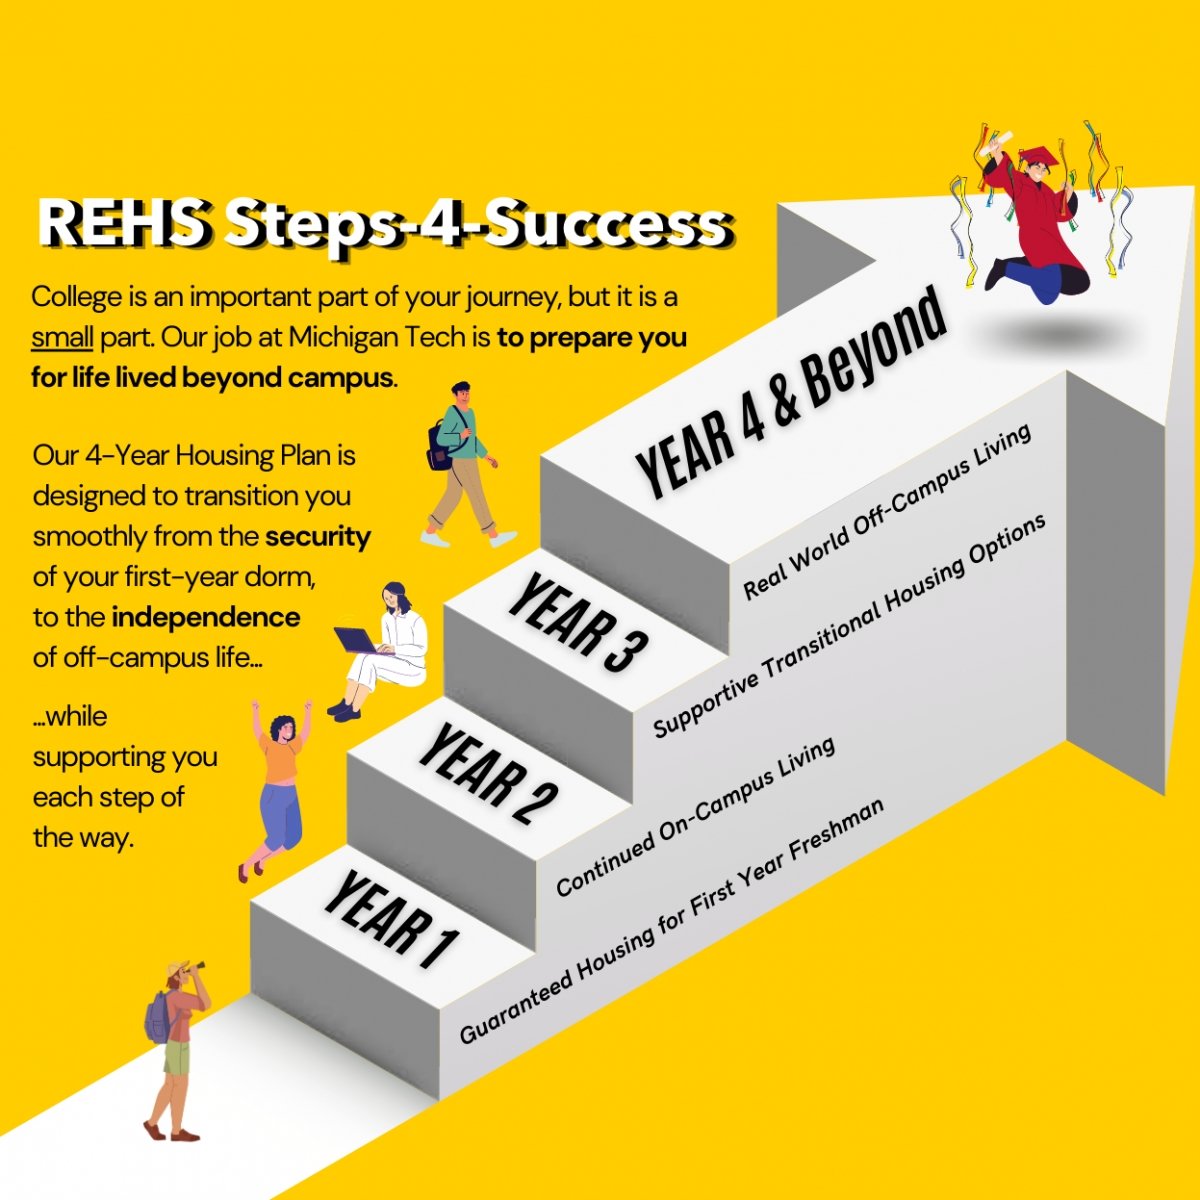 REHS steps for success based off of year 1-4